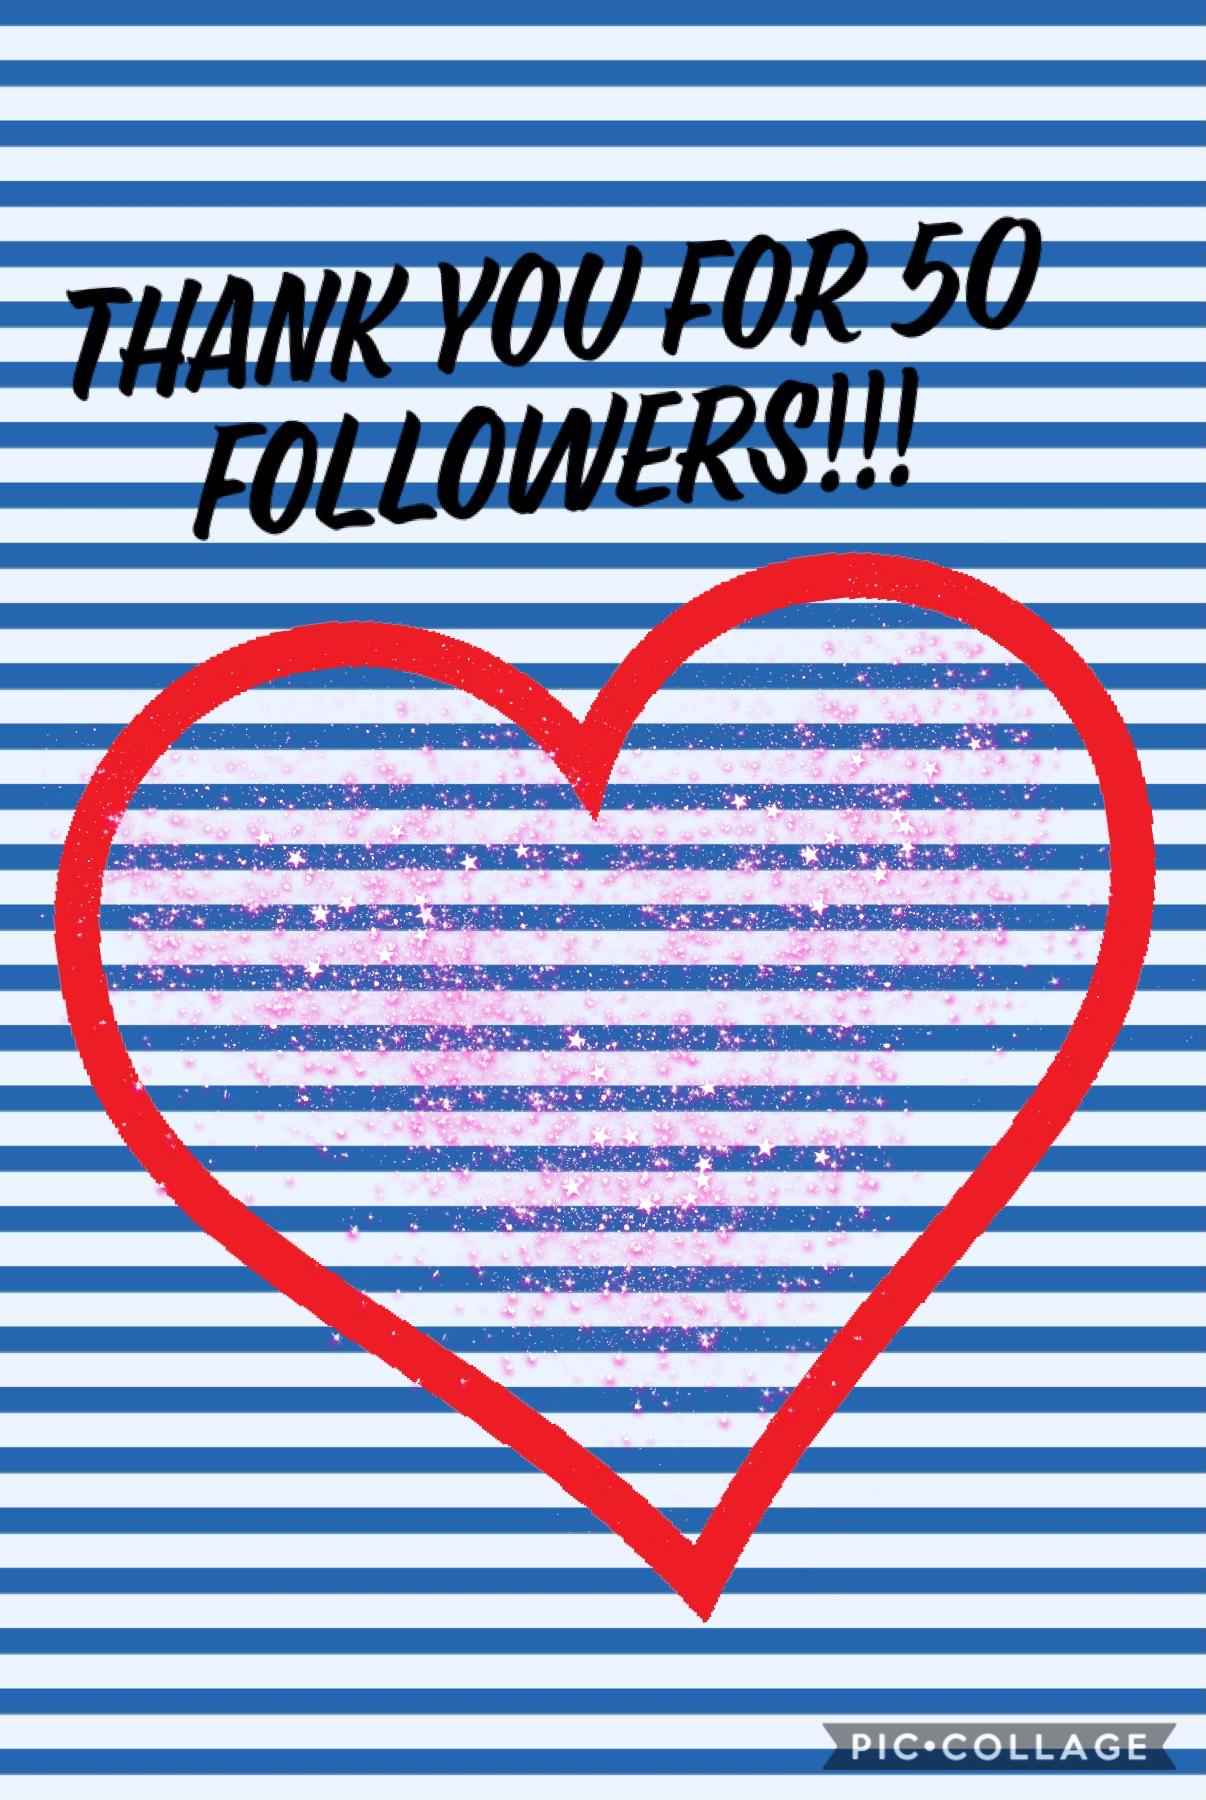 50 FOLLOWERS! (Click)
💞💞💞
THANK YOU SO MUCH!
WE ARE HALFWAY TO 100 FOLLOWERS!!
💞💞💞
THANK YOU!!
💞💞💞
Like, share, comment and Follow me!!!